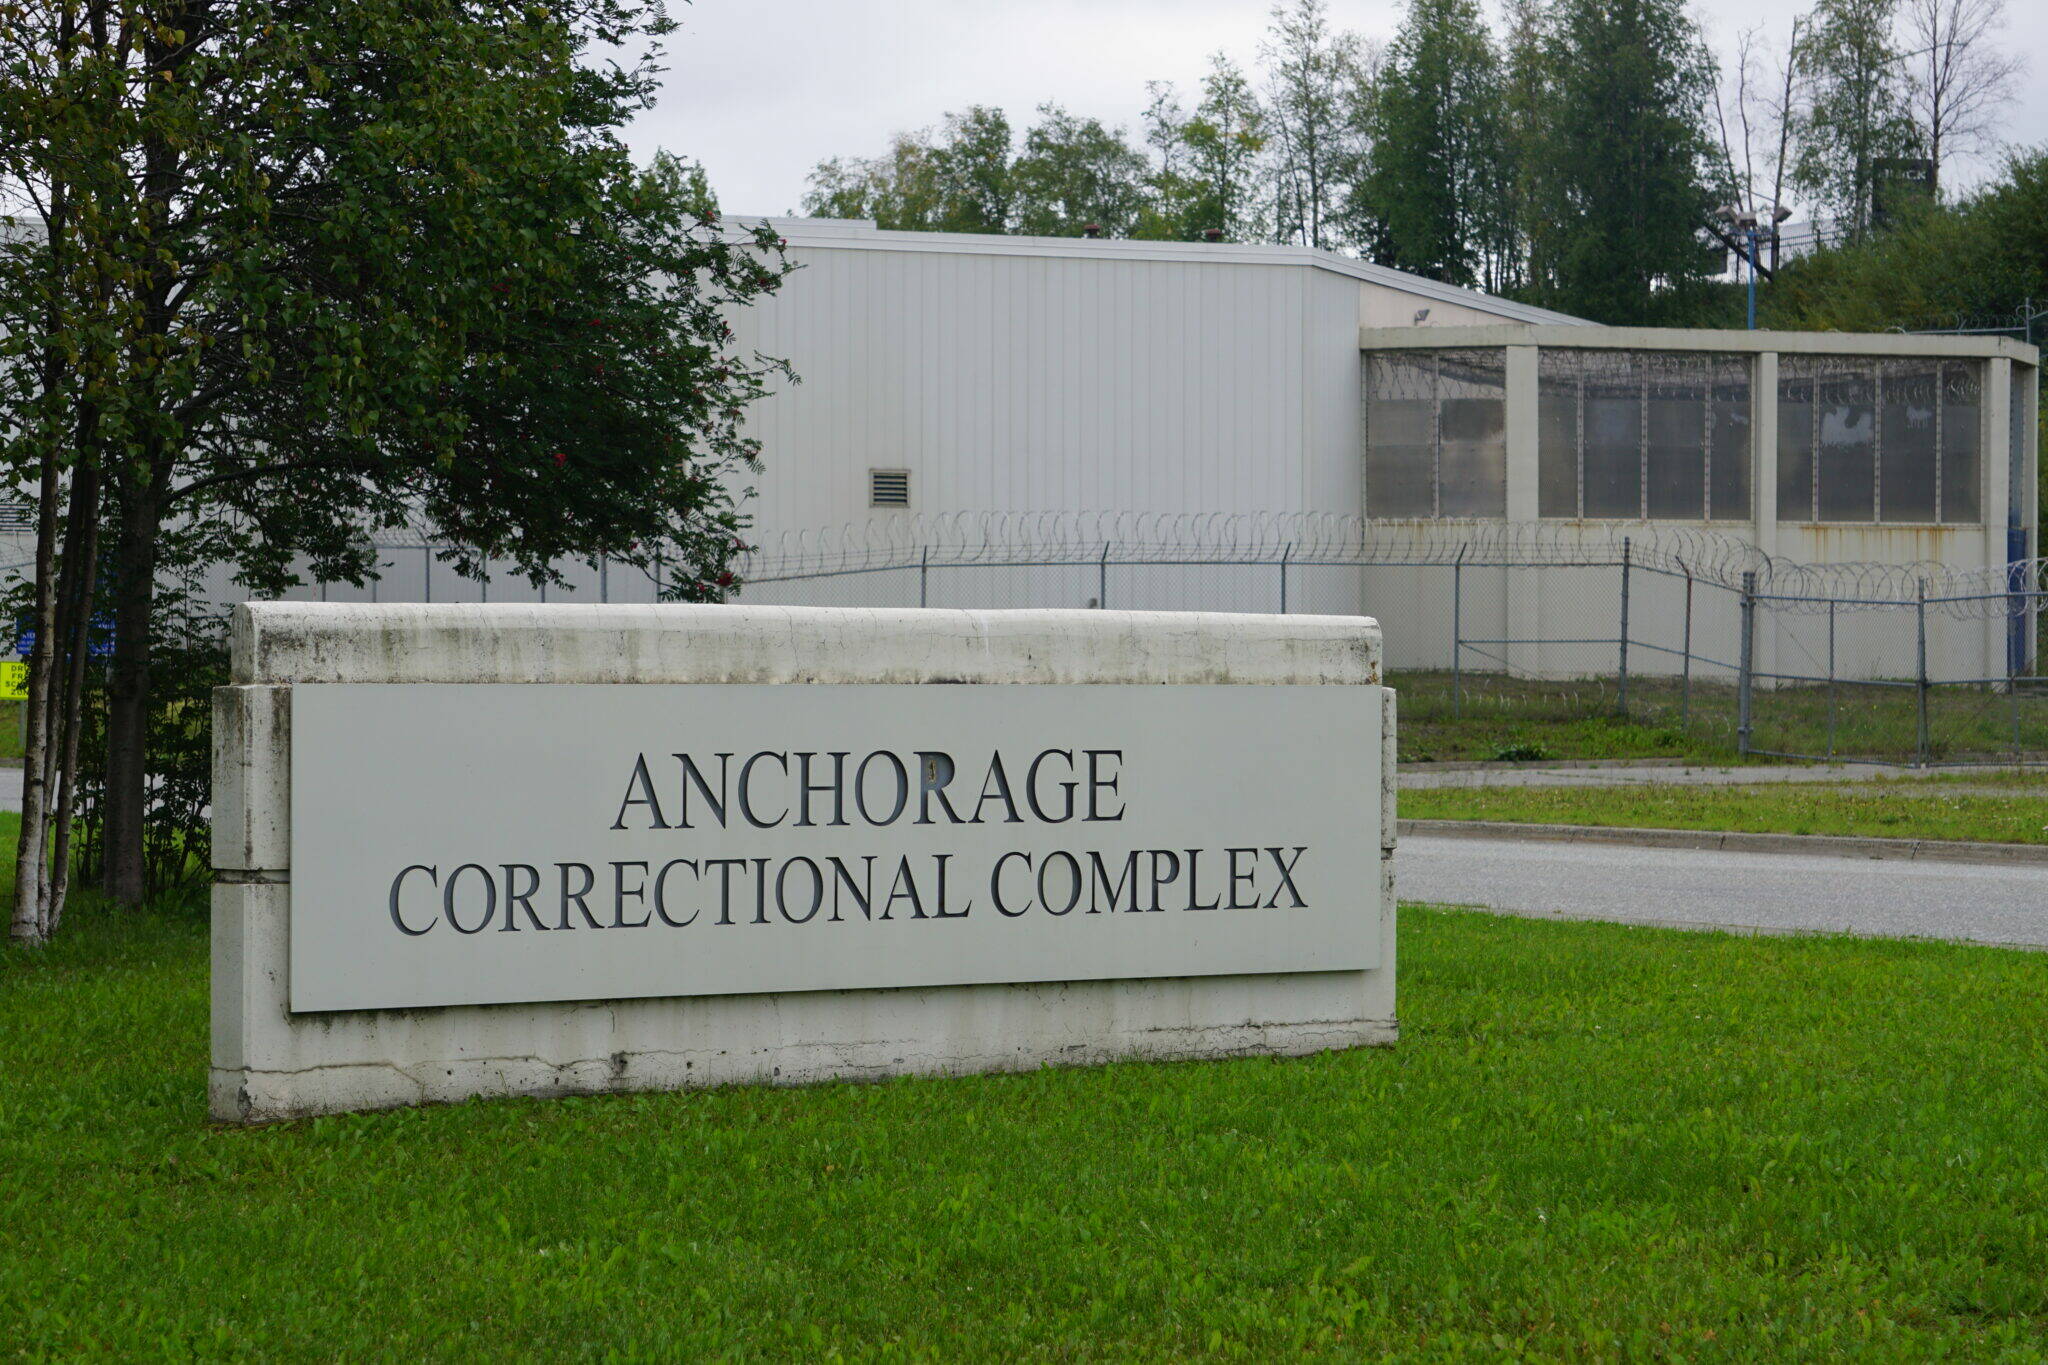 The entrance to the Anchorage Correctional Complex is seen on Aug. 29, 2022. (Photo by Yereth Rosen/Alaska Beacon)